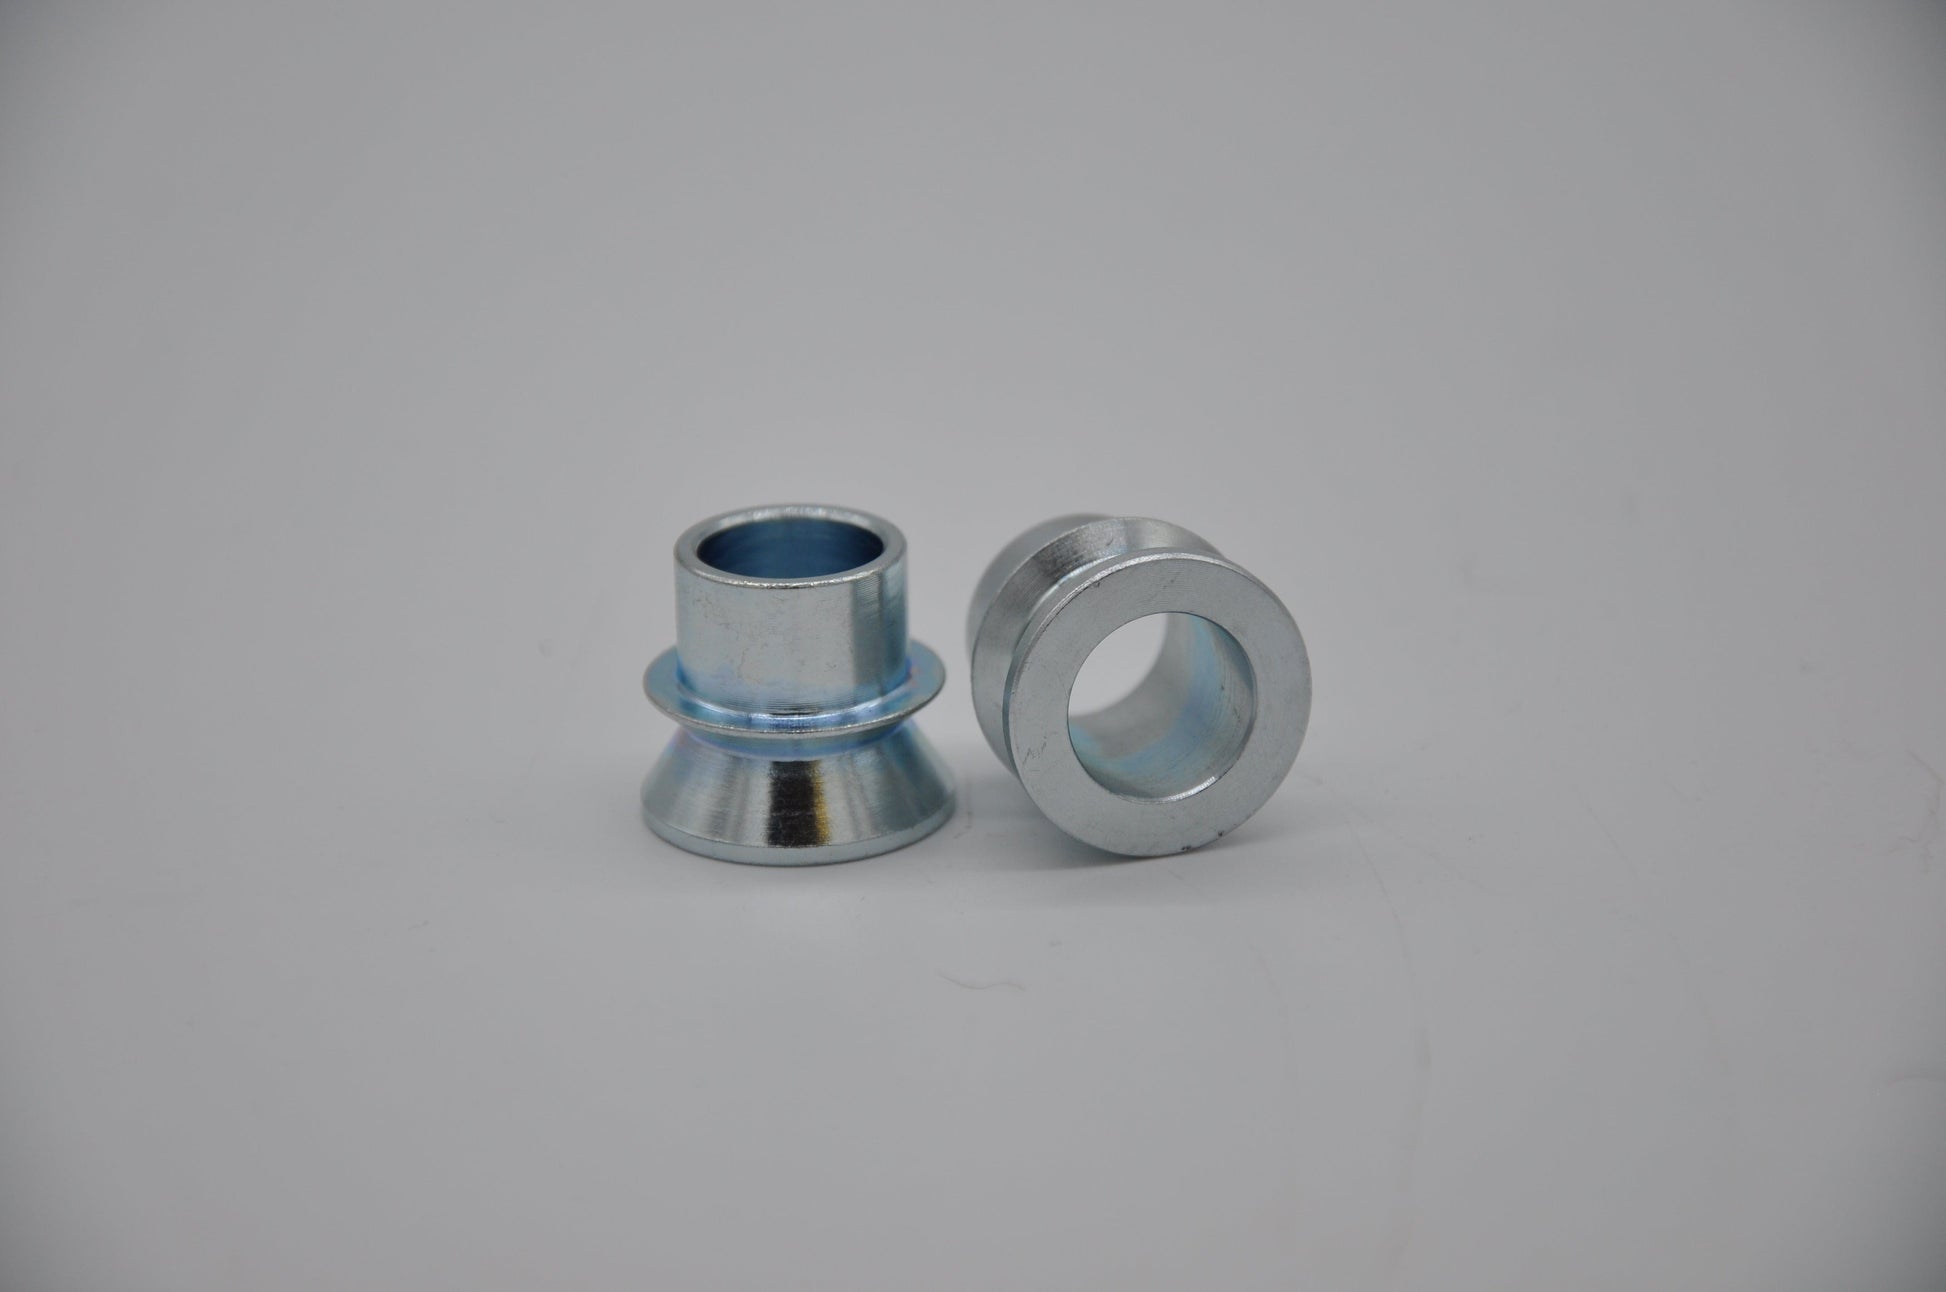 Two 12mm Misalignment Spacers for Tie Rods Kits